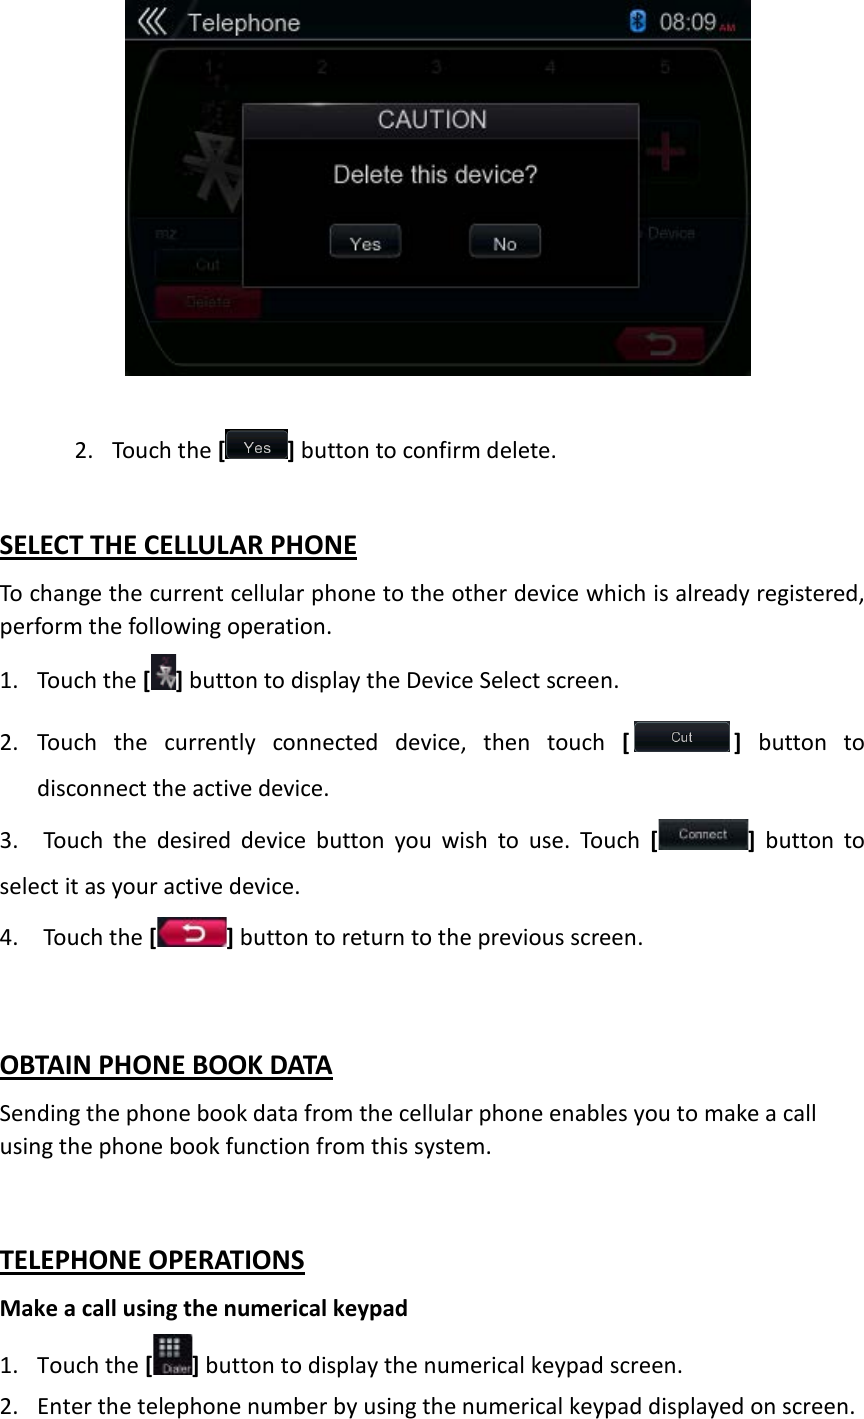              2. Touch the [ ] button to confirm delete.  SELECT THE CELLULAR PHONE To change the current cellular phone to the other device which is already registered, perform the following operation. 1. Touch the [ ] button to display the Device Select screen.   2. Touch the currently connected device, then touch [ ] button to disconnect the active device.   3. Touch the desired device button you wish to use. Touch [ ] button to select it as your active device.   4. Touch the [] button to return to the previous screen.  OBTAIN PHONE BOOK DATA Sending the phone book data from the cellular phone enables you to make a call using the phone book function from this system.  TELEPHONE OPERATIONS Make a call using the numerical keypad 1. Touch the [] button to display the numerical keypad screen. 2. Enter the telephone number by using the numerical keypad displayed on screen. 